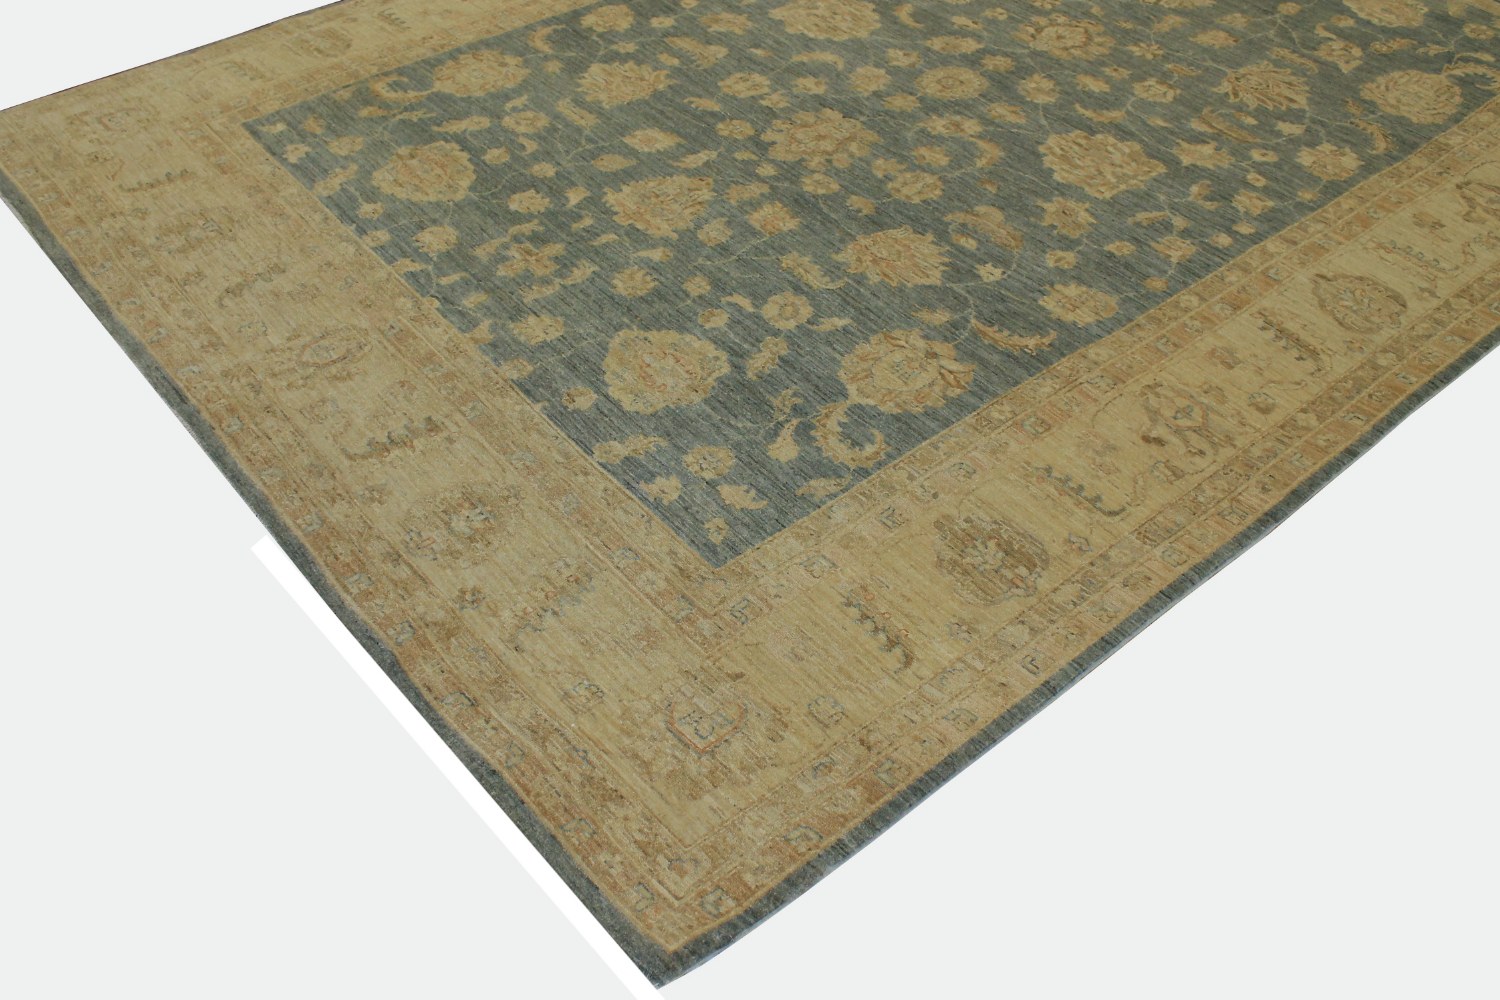 9x12 Peshawar Hand Knotted Wool Area Rug - MR13231